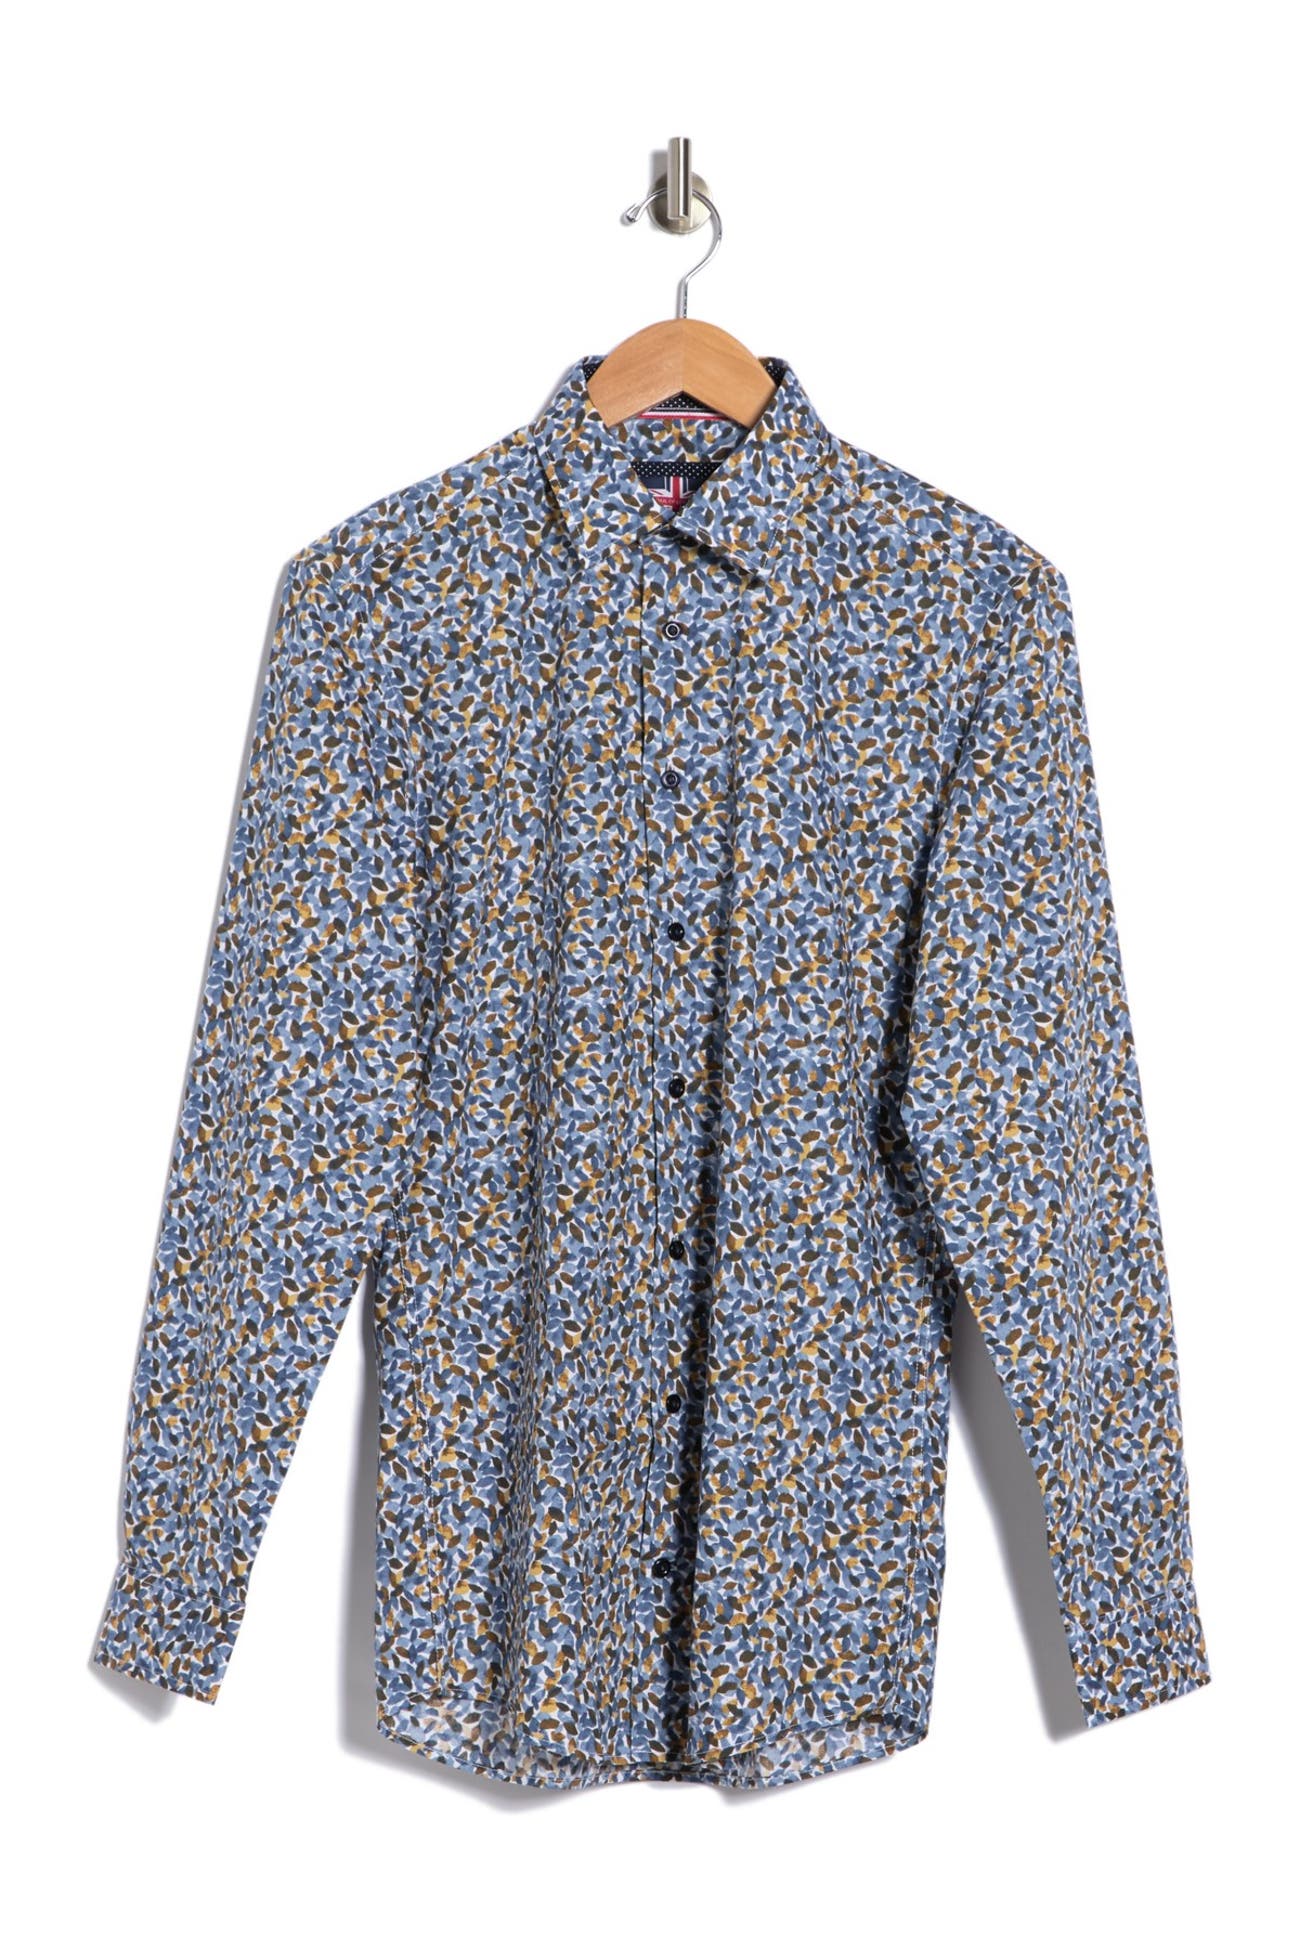 SOUL OF LONDON | Abstract Print Shirt | Nordstrom Rack